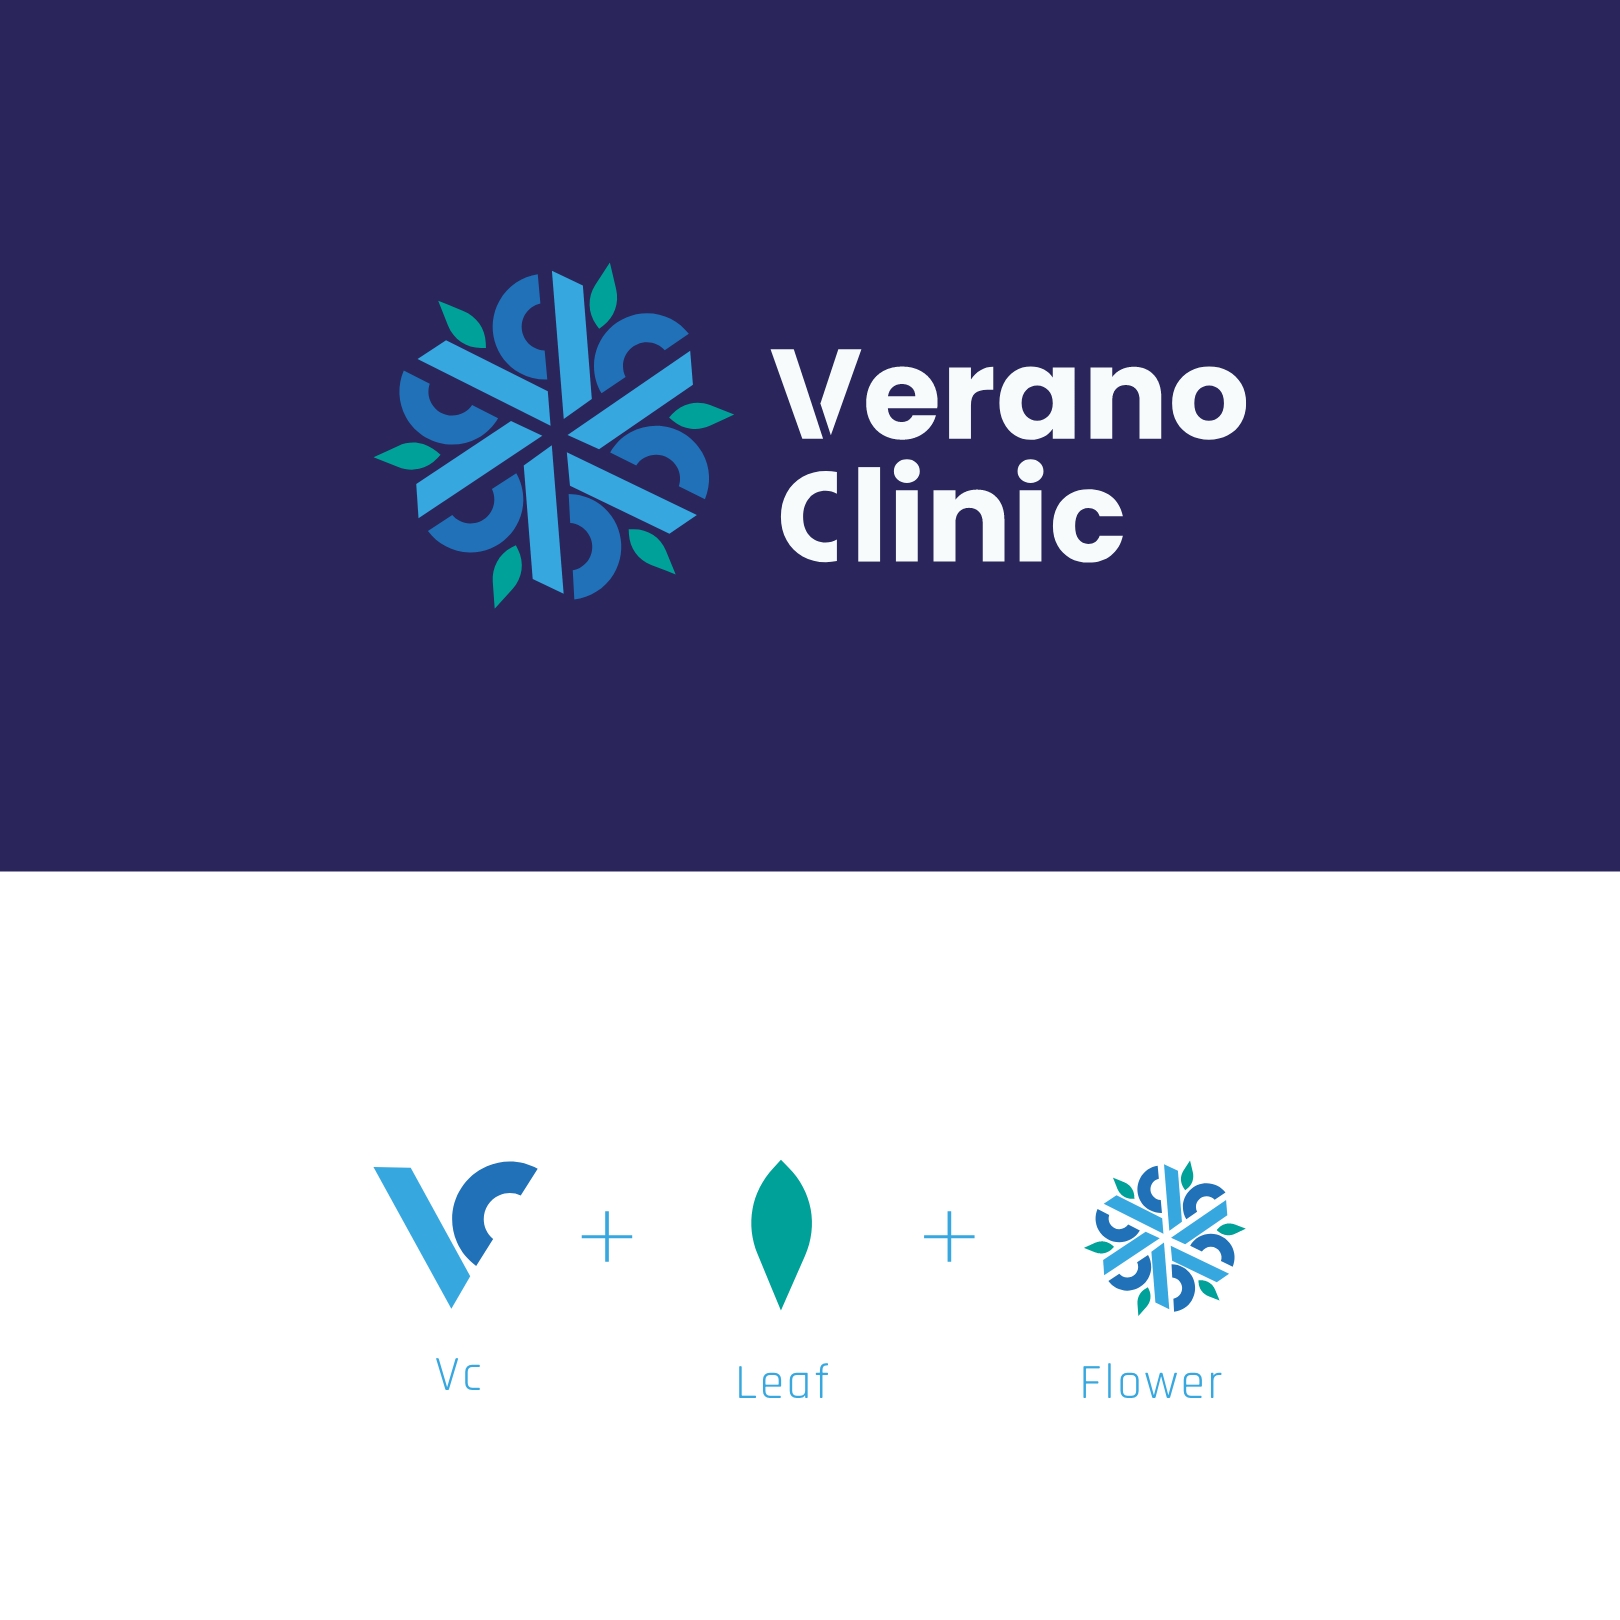 Designing and developing the brand for Verona Clinic